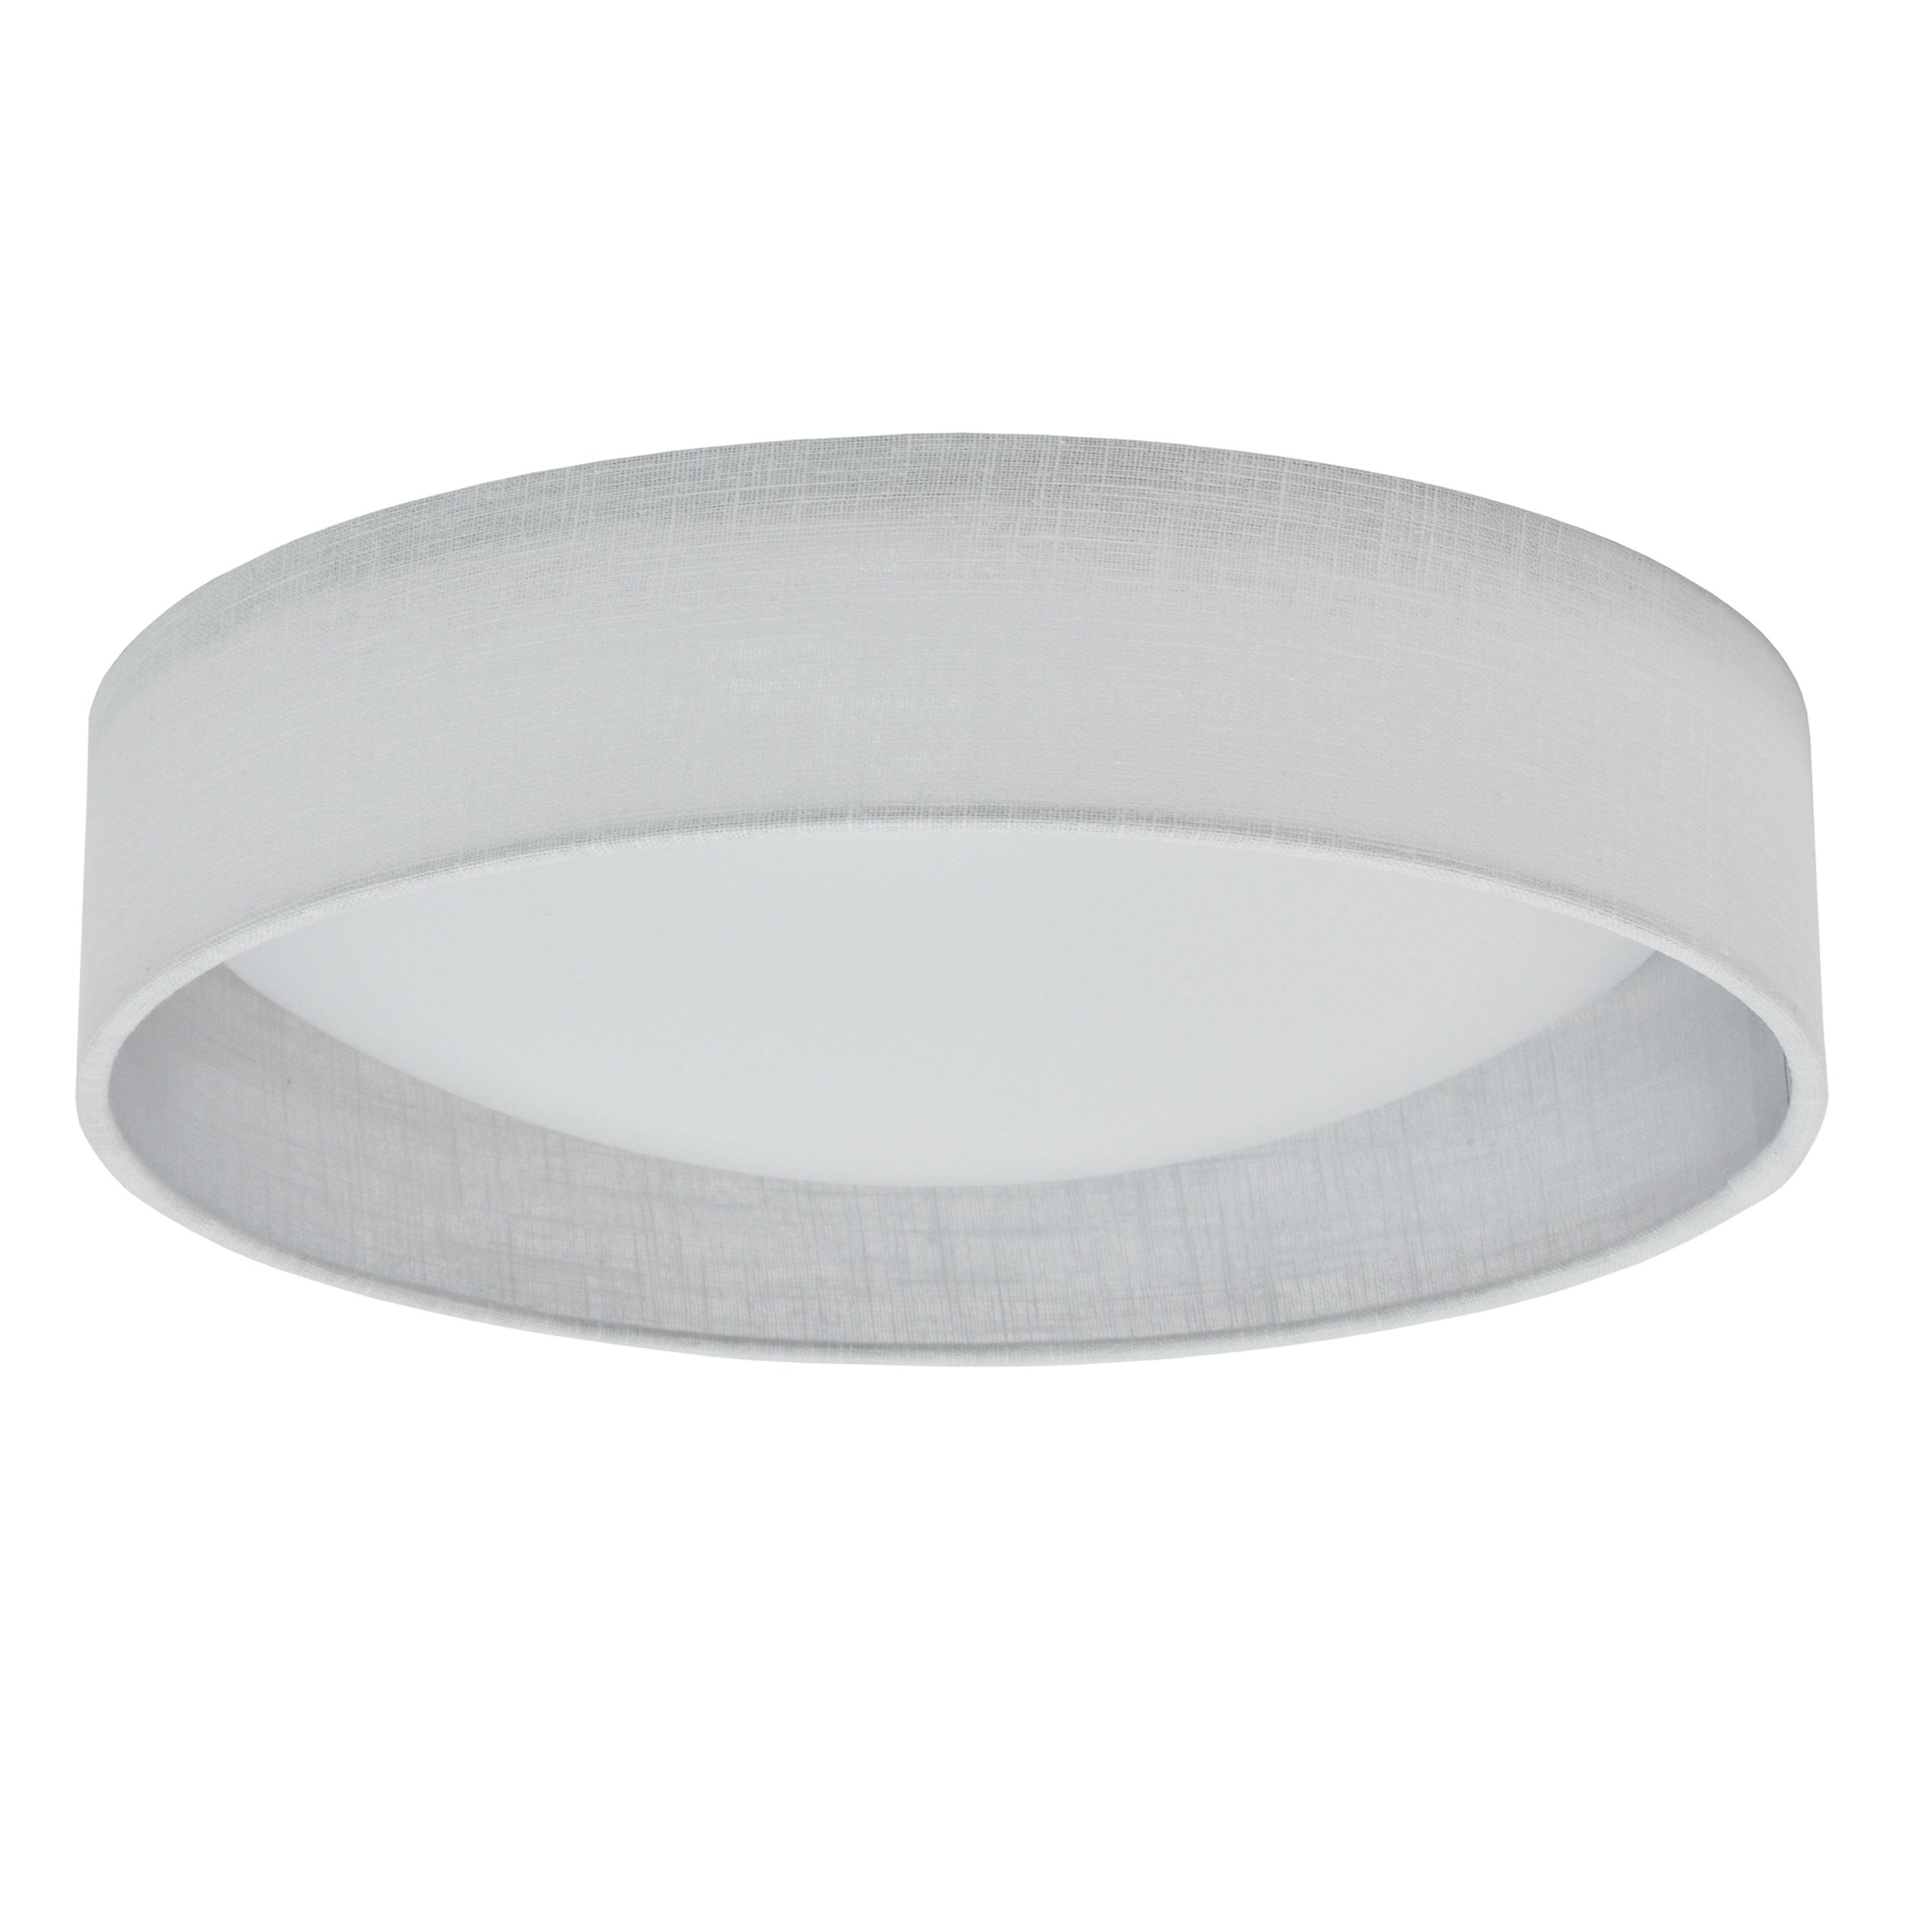 A simple design, and a sleek profile, make CFLD lighting a versatile family that will enhance the furnishing in many areas of your home. The design features an integrated LED light. LED fixtures produce light at up to 90 percent better efficiency than incandescent lighting. An acrylic base holds a fabric shade in a drum style. With a narrow profile, it reveals both the rounded LED inside, and an optional contrasting finish on the interior of the shade. With its clean lines and unfussy appeal, the CFLD family of lighting works well in your modern kitchen, bedroom, hallway or utlity room.